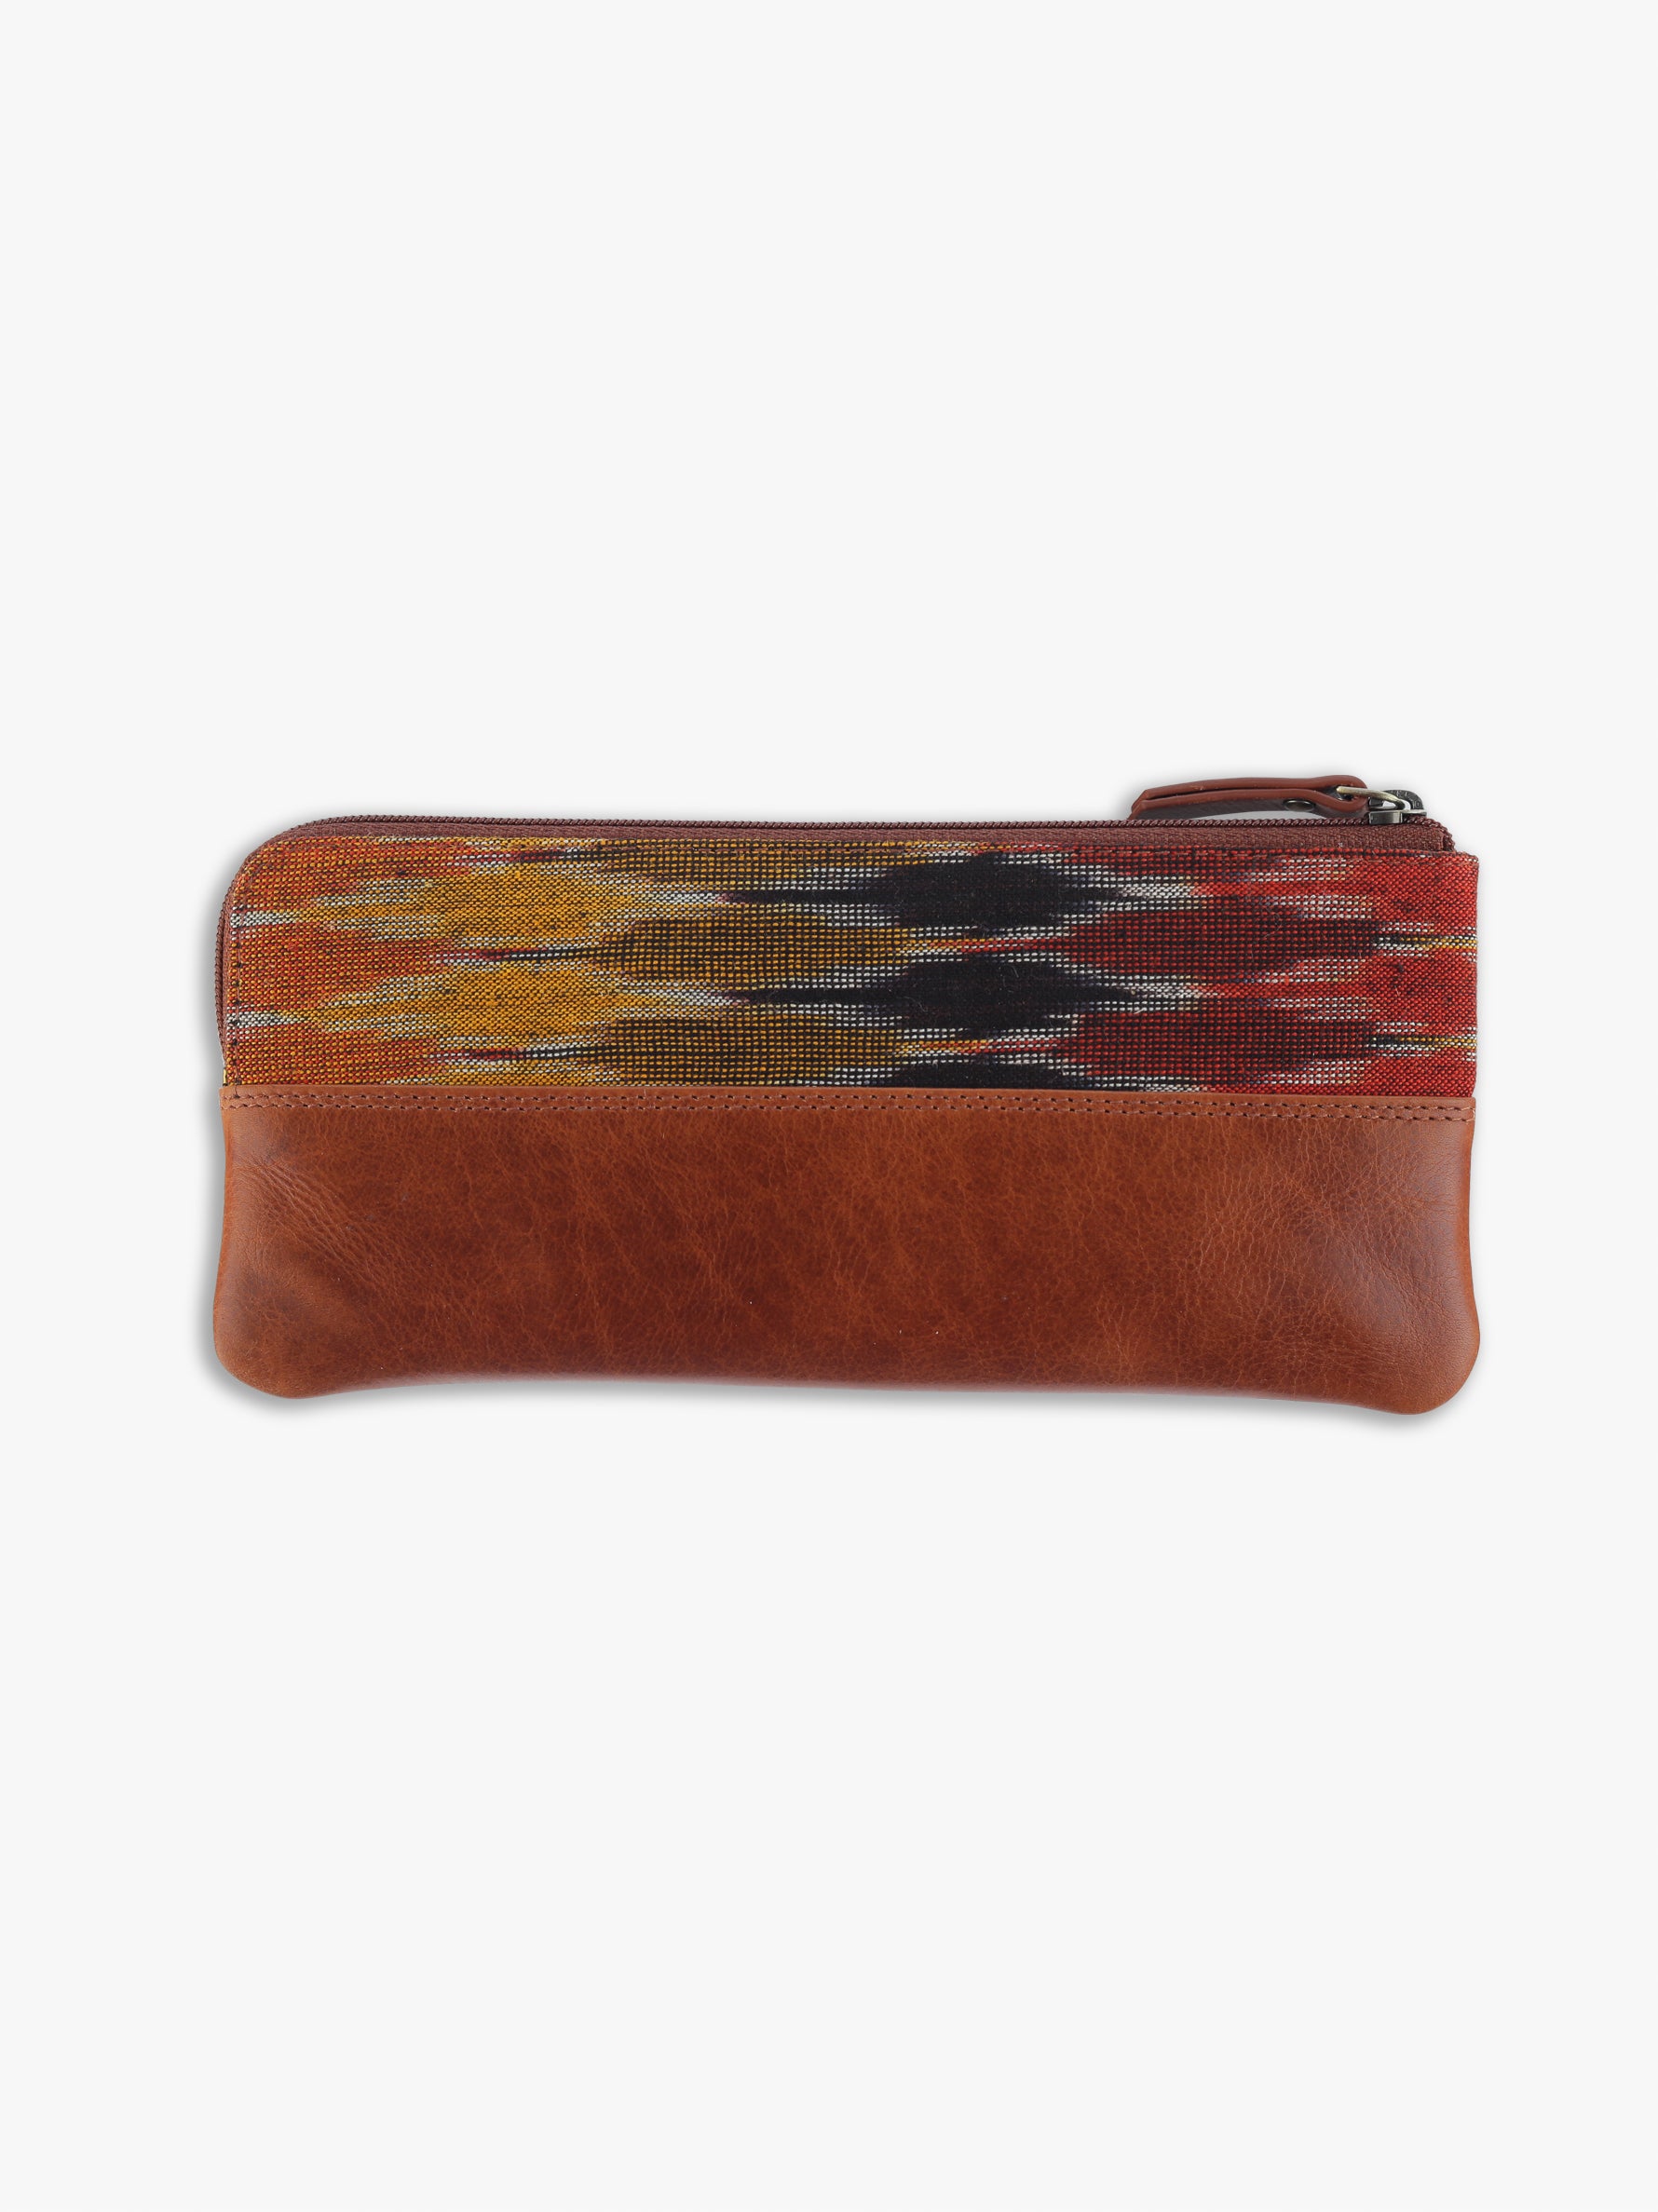 Pencil Pouch (Multi Red Ikat)